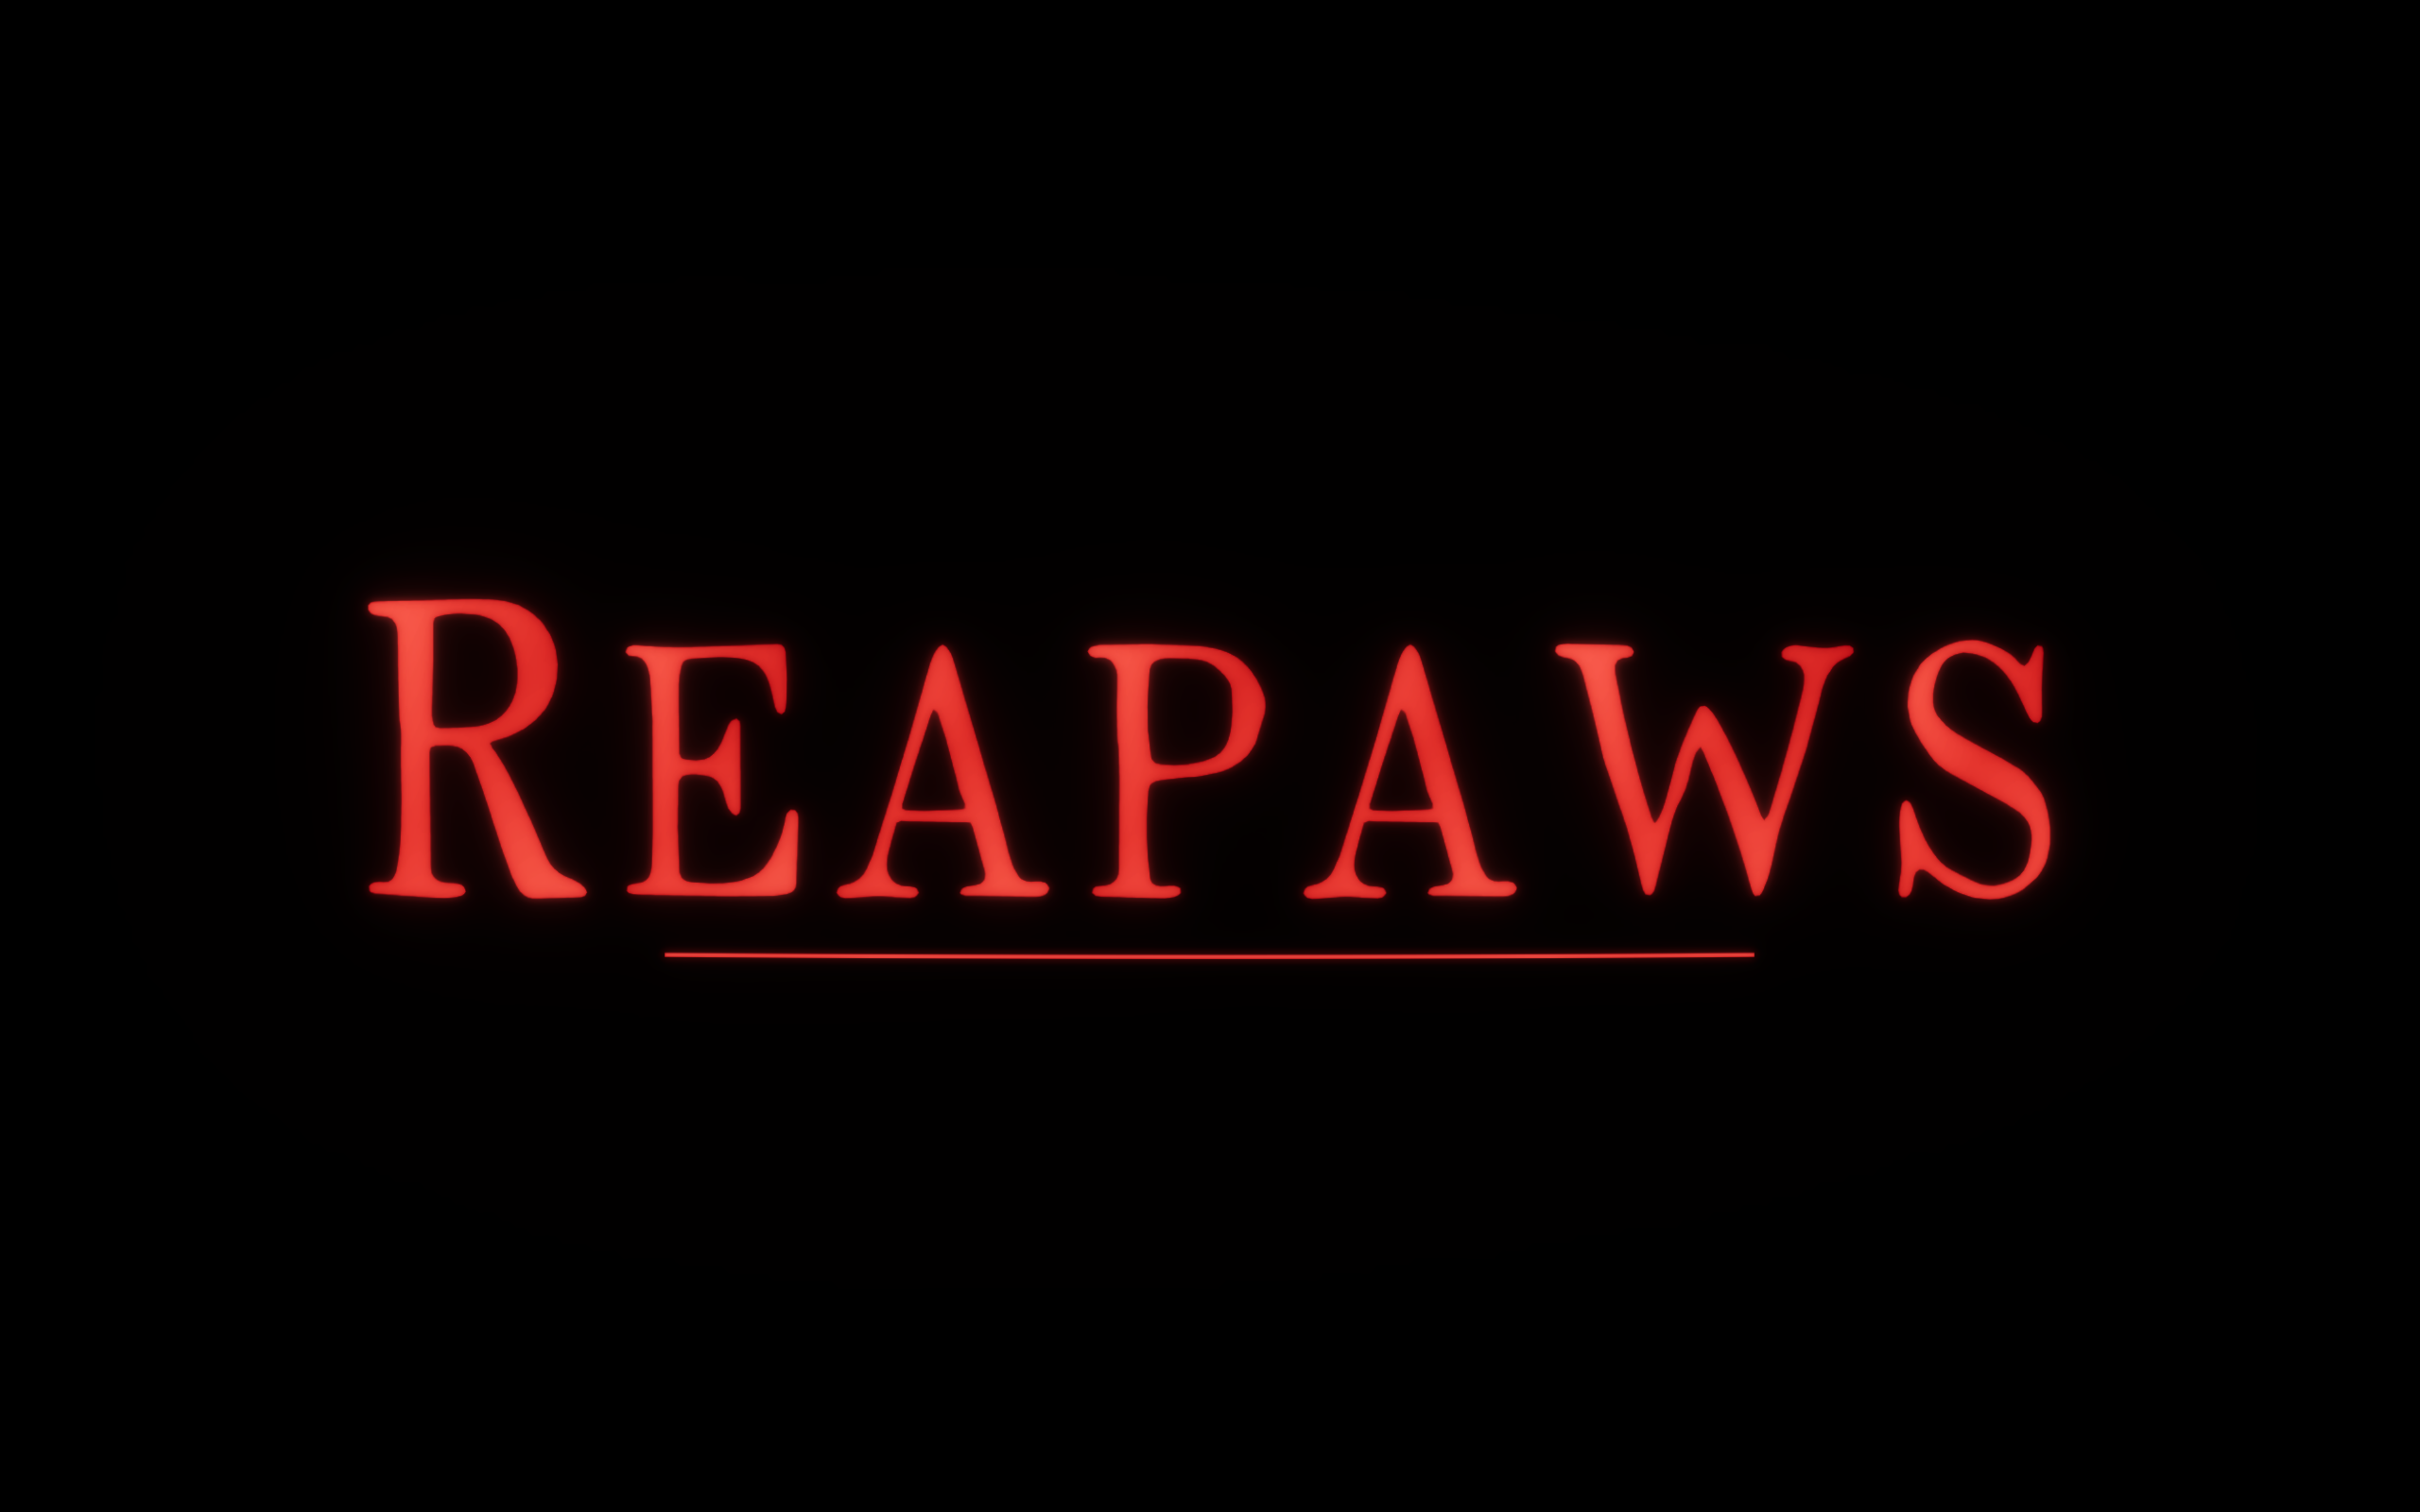 Reapaws